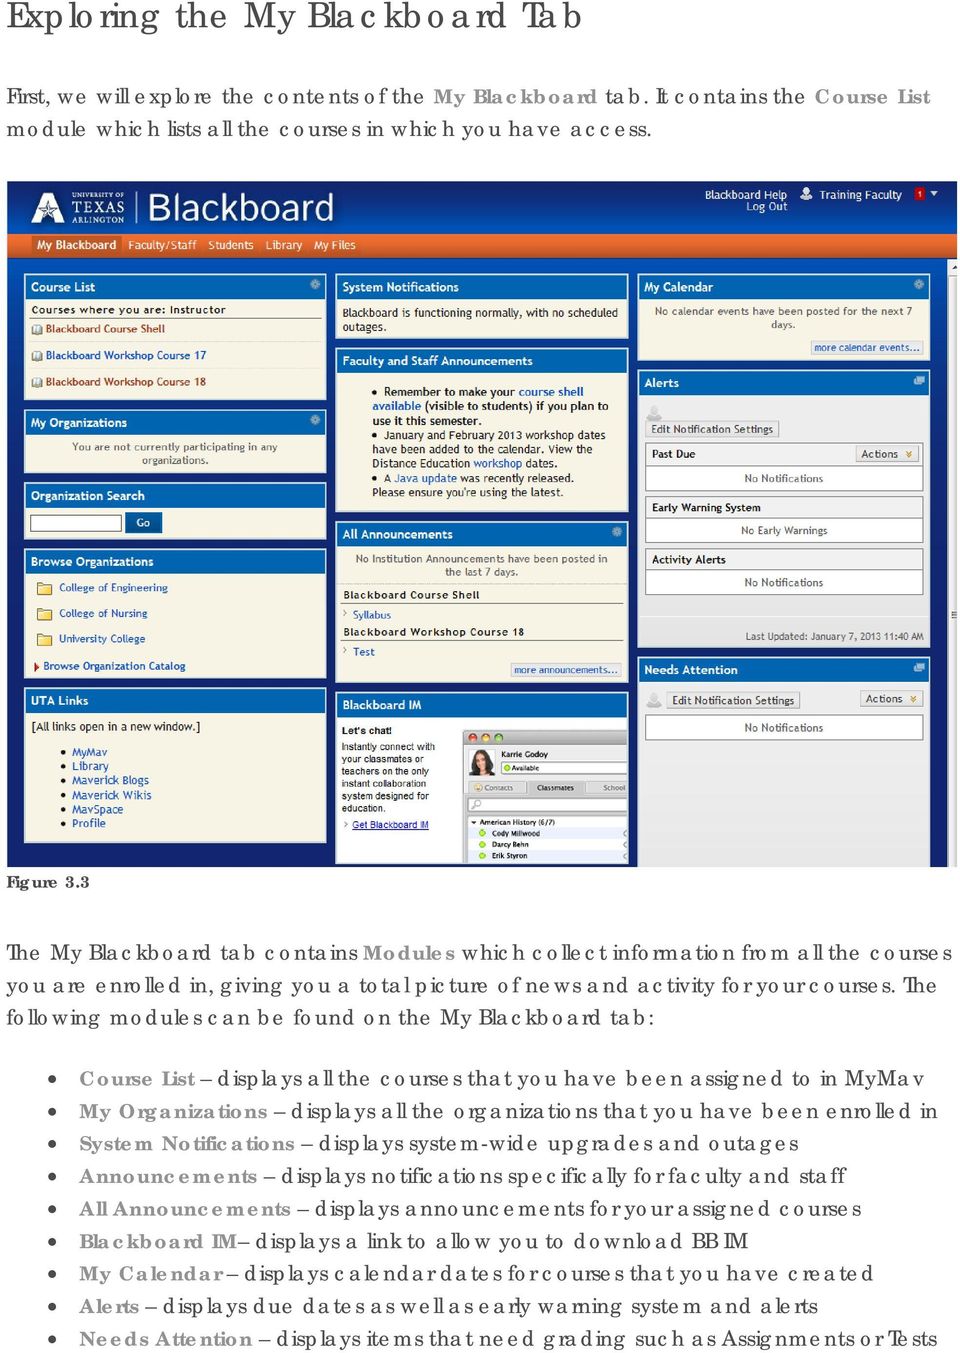 The following modules can be found on the My Blackboard tab: Course List displays all the courses that you have been assigned to in MyMav My Organizations displays all the organizations that you have